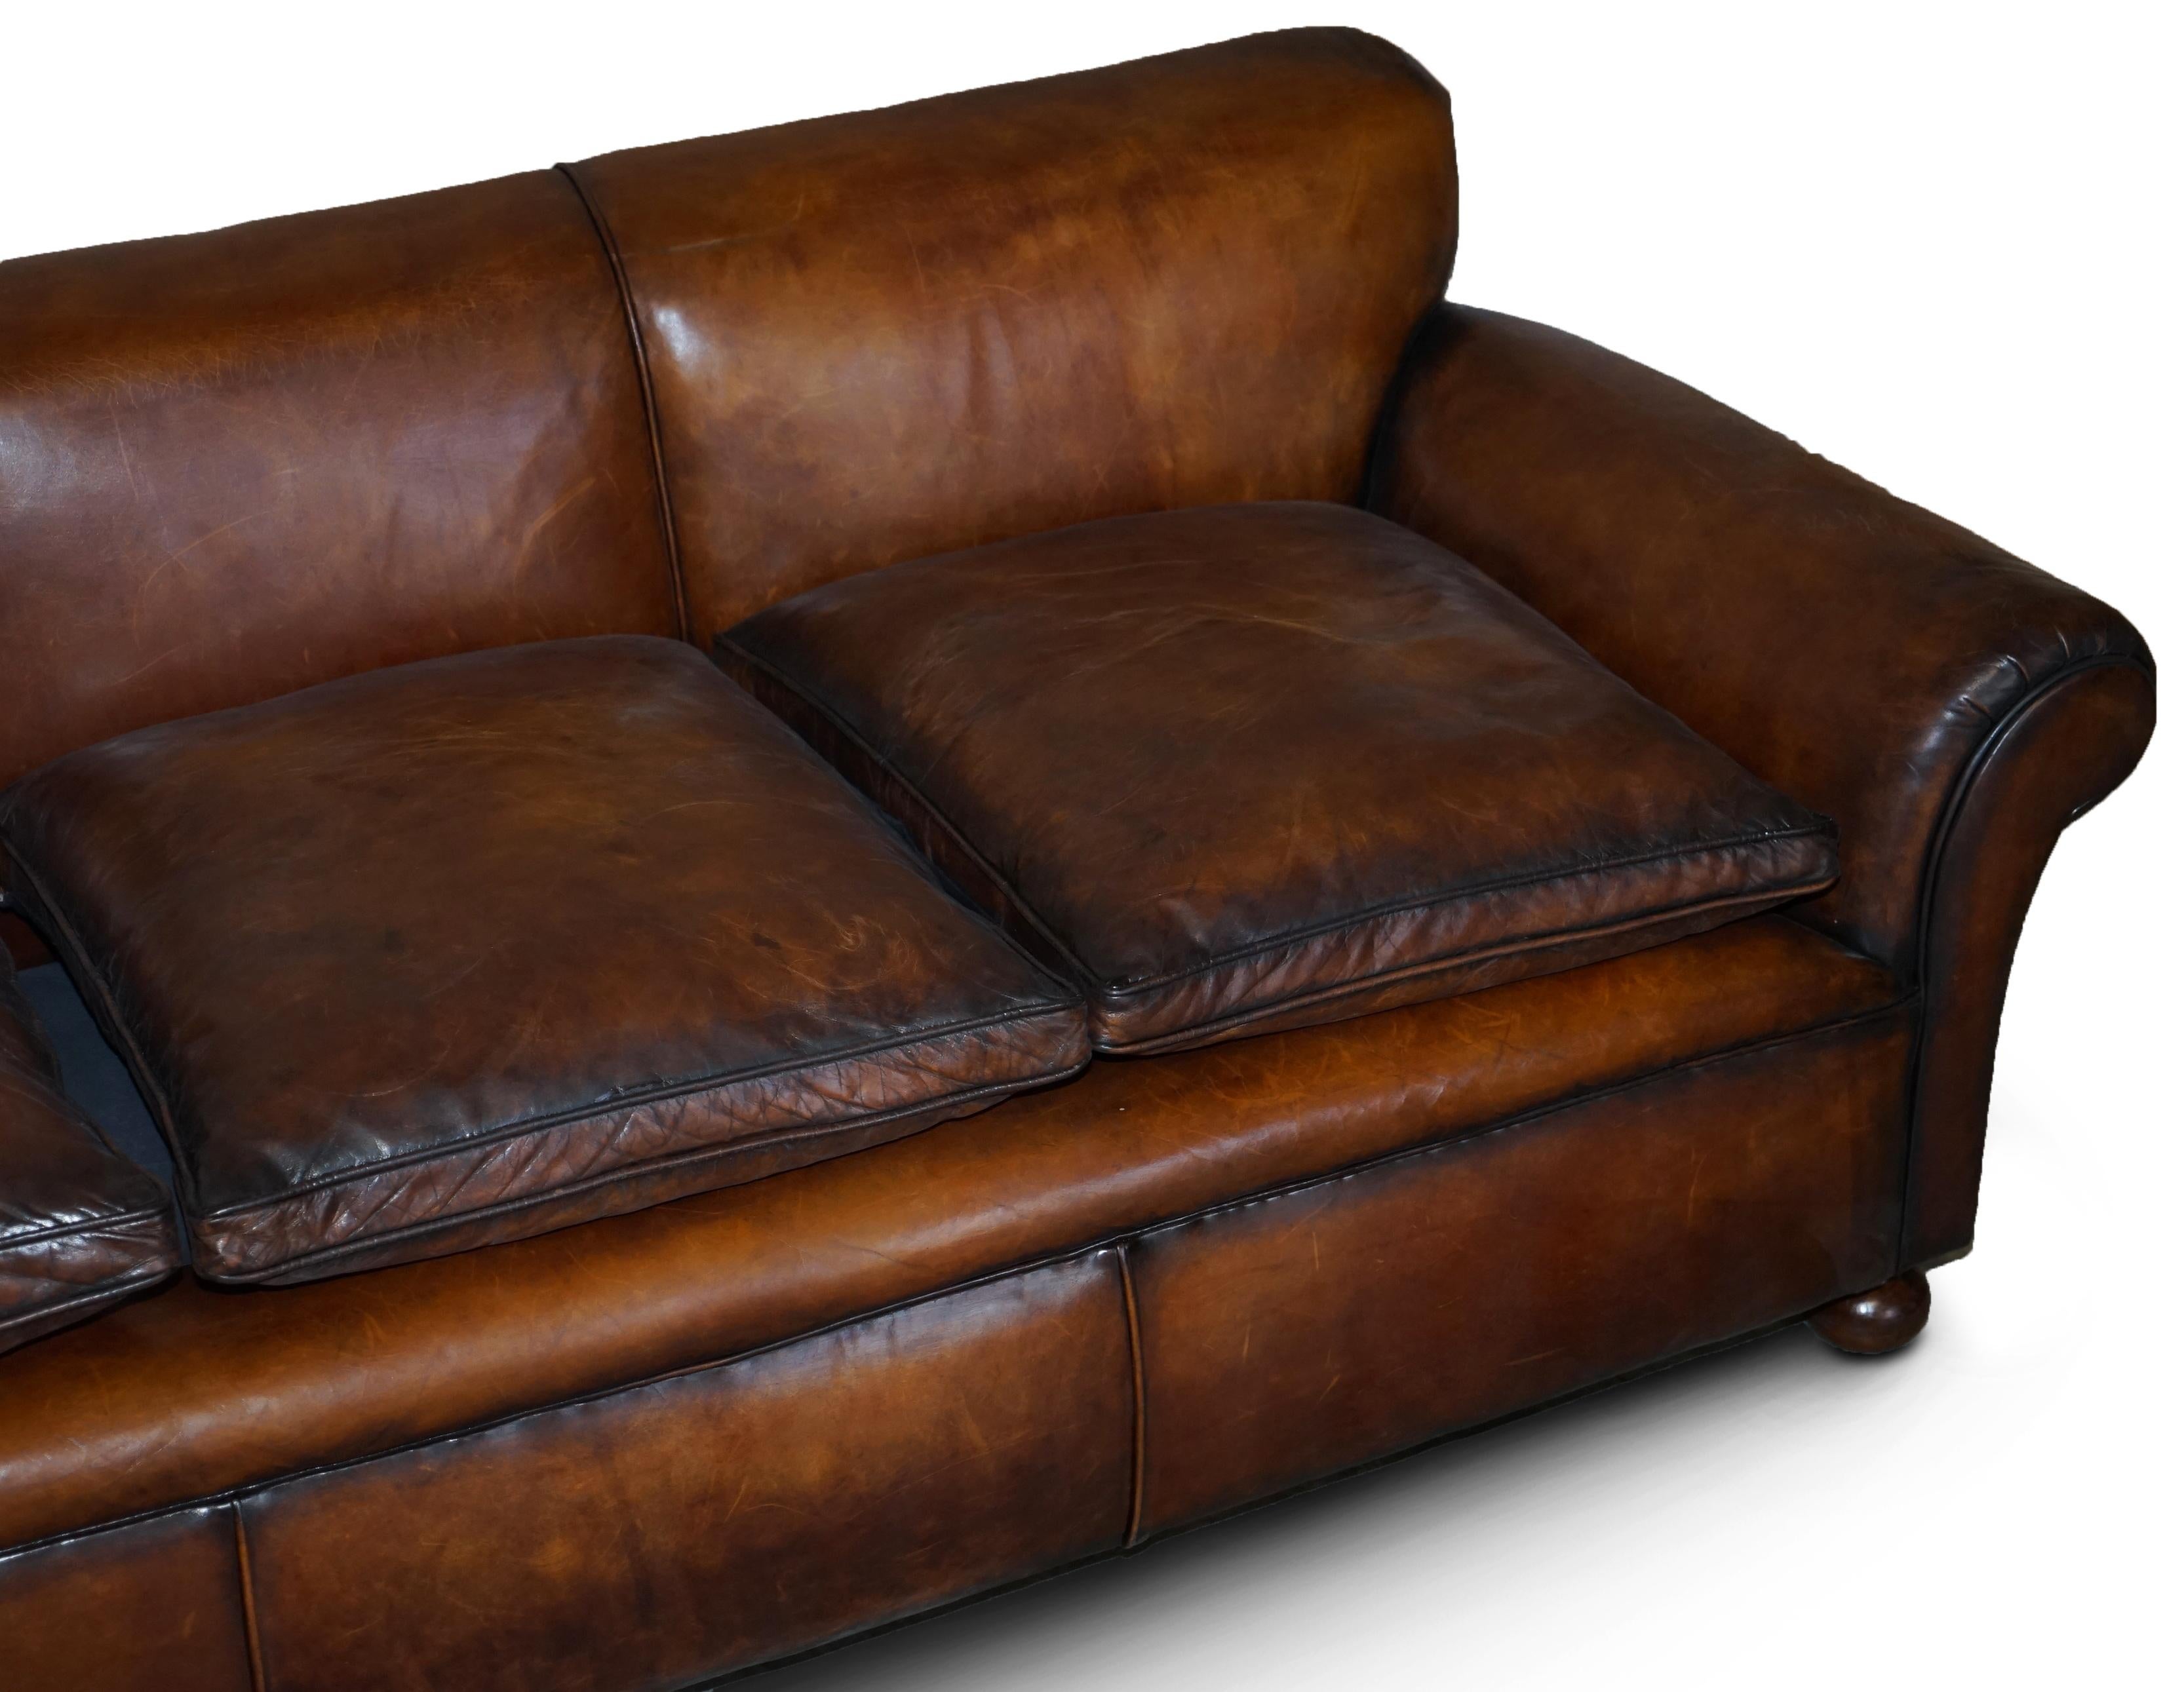 English Restored Hand Dyed Brown Leather Antique Victorian 3-4 Seat Sofa Feather Seats For Sale